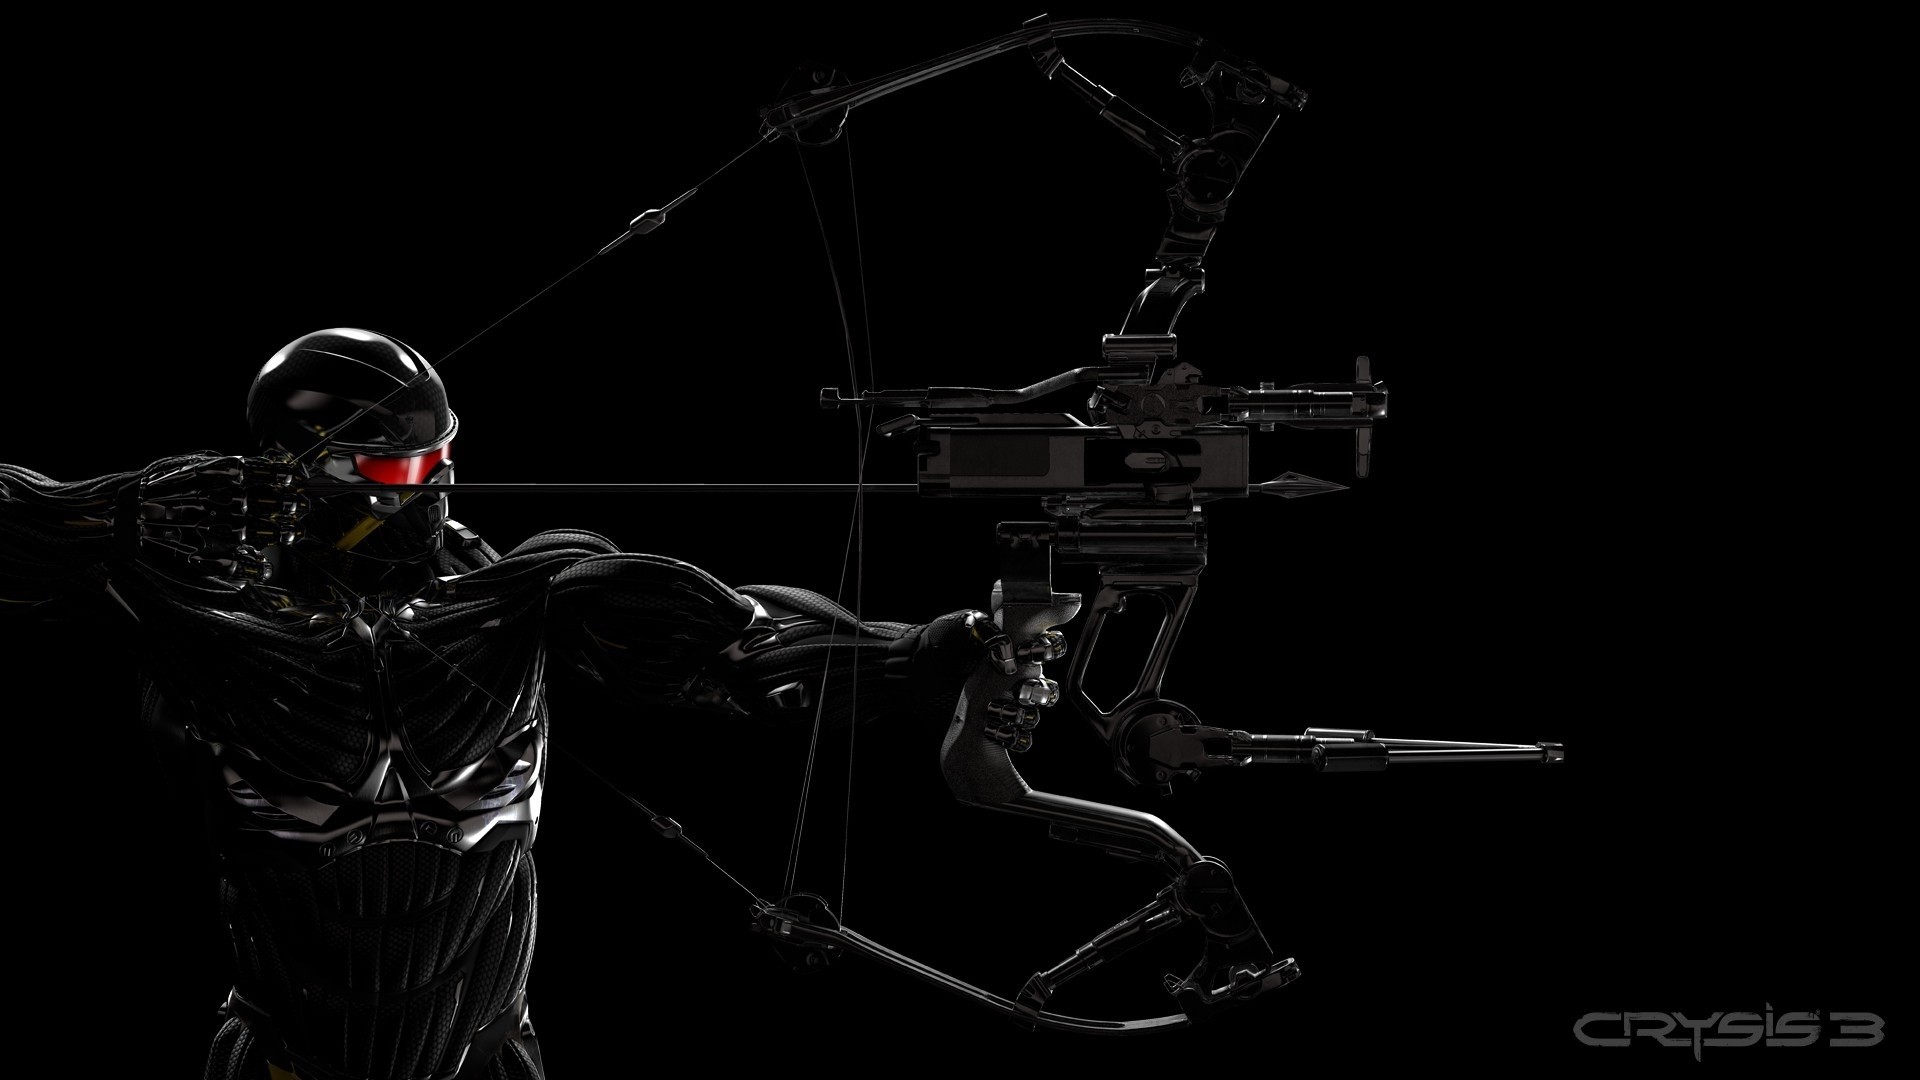 General 1920x1080 Crysis Crysis 3 video games bow weapon simple background black background Crytek Electronic Arts first-person shooter